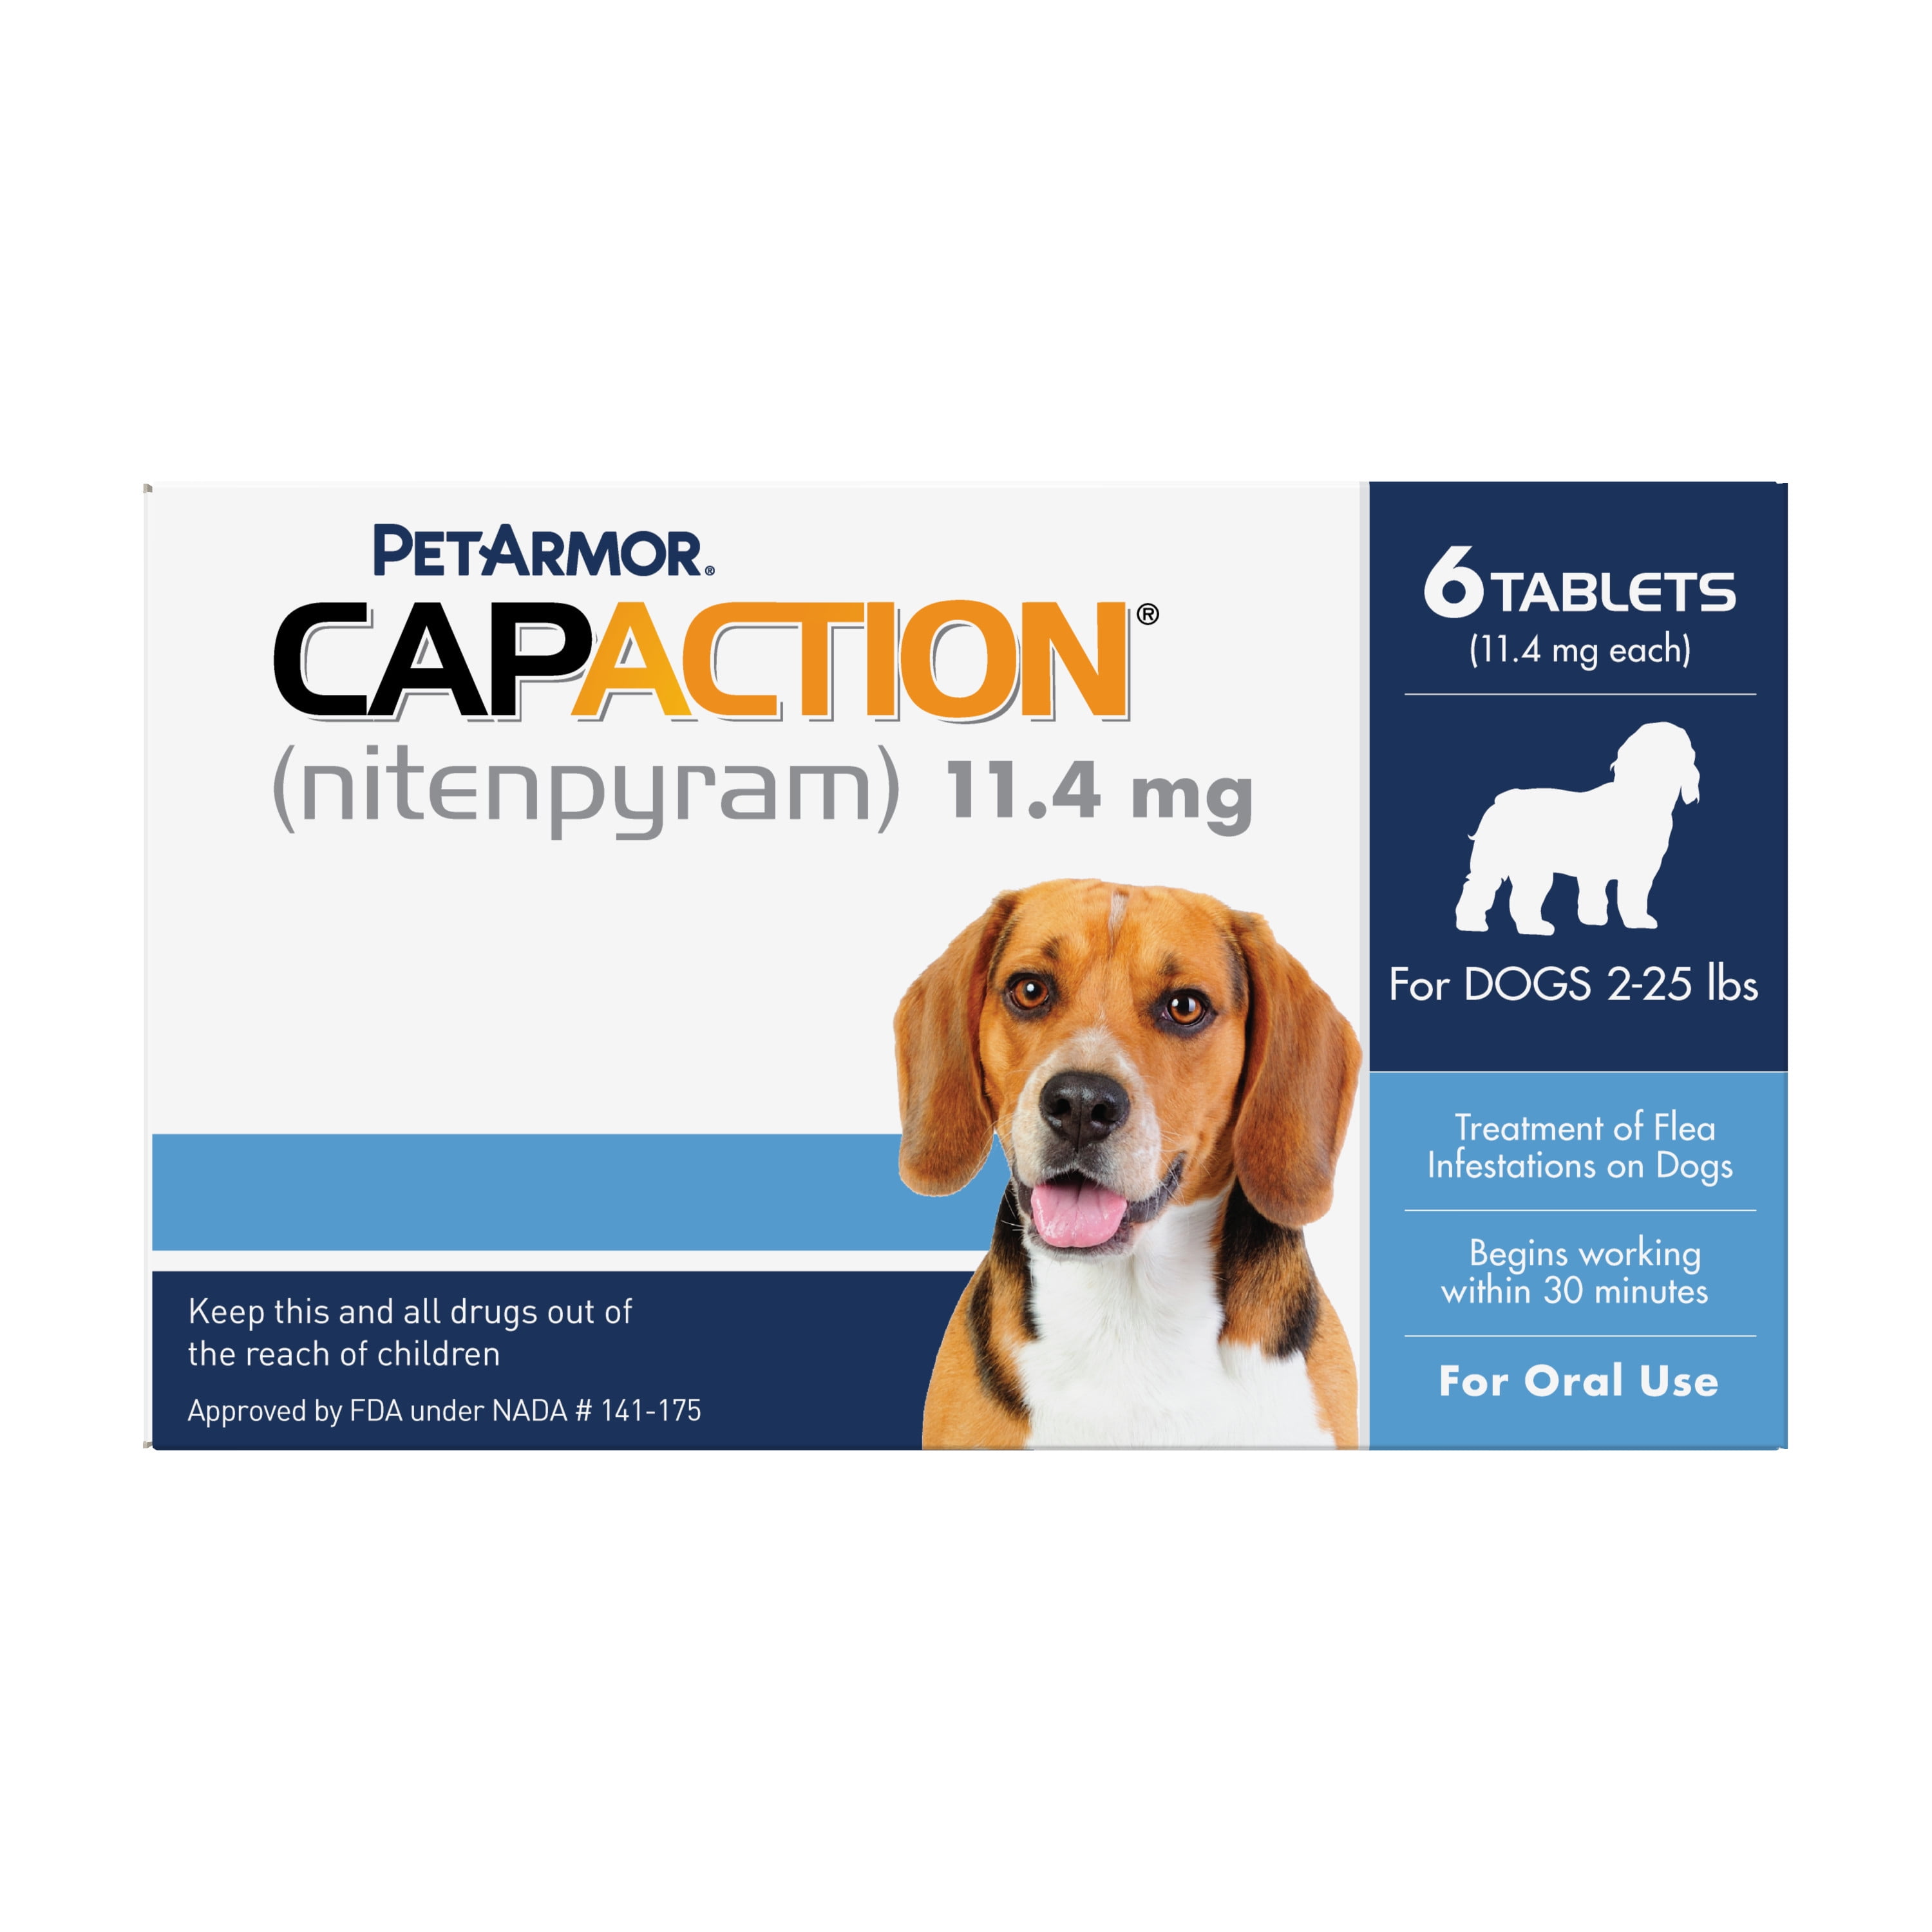 PETARMOR CAPACTION Fast-Acting Oral Flea Treatment for Small Dogs (2-25 lbs),  6 Doses, 11.4 mg - Walmart.com